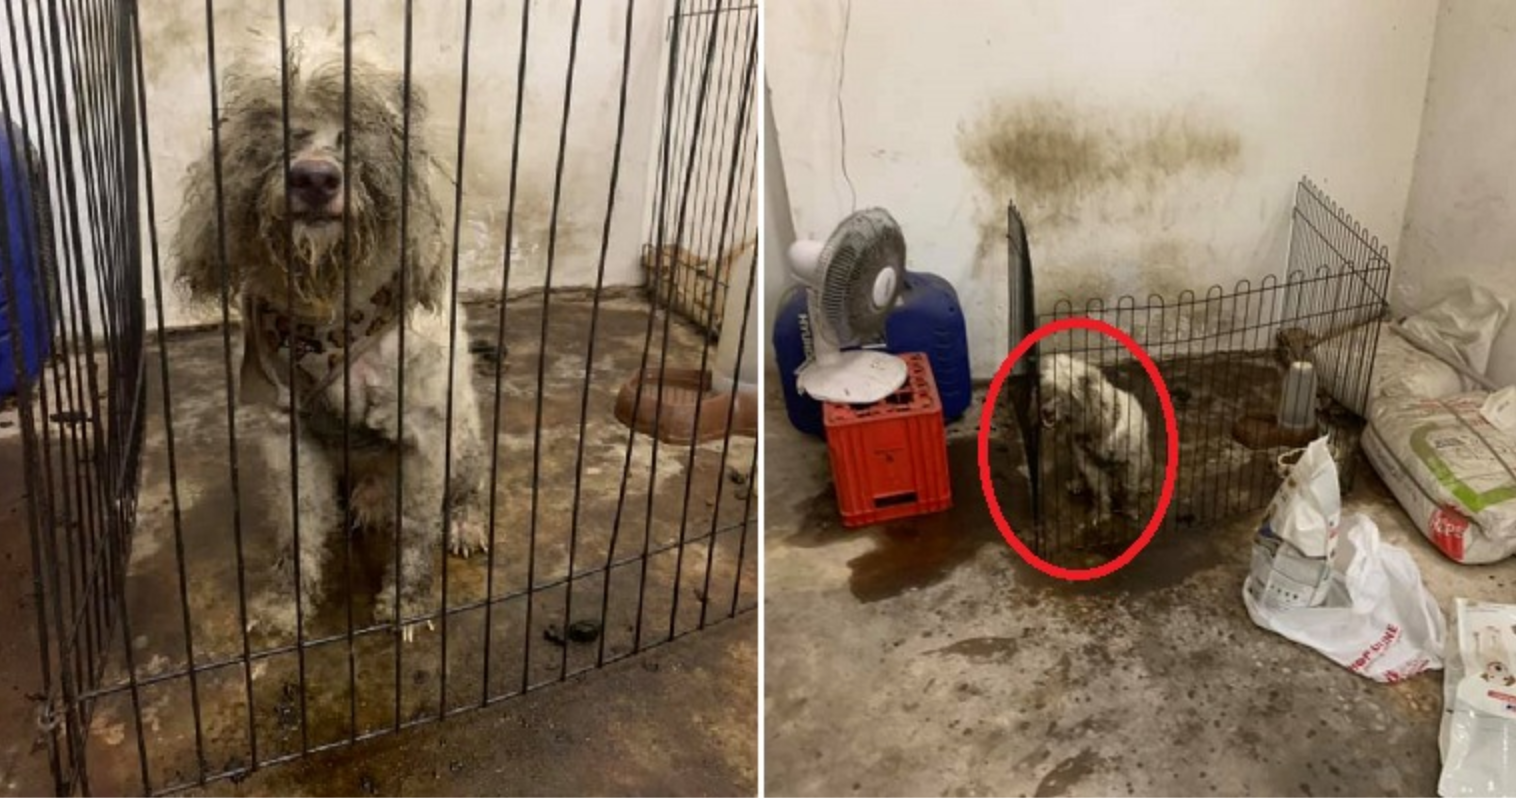 Sentul Girl's Pet Dog was Cruelly Killed by Being Yanked in Between a Fence Gap - WORLD OF BUZZ